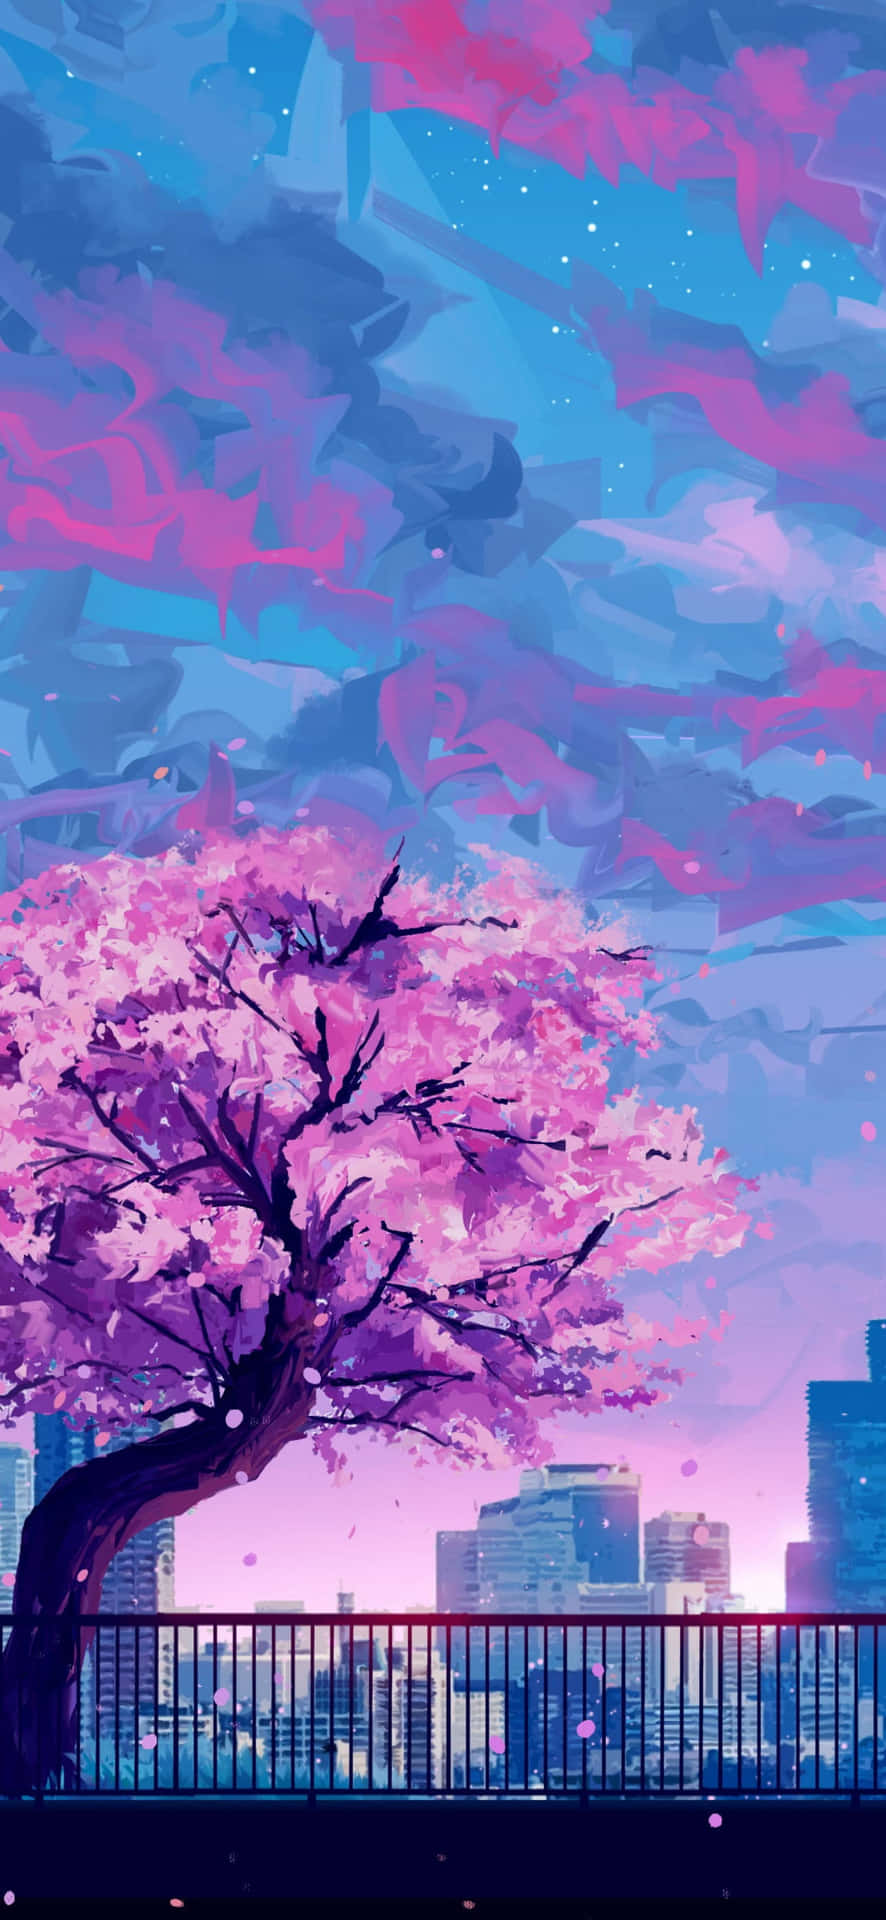 Download Cherry Blossom Tree Anime Japanese Iphone Wallpaper | Wallpapers .com